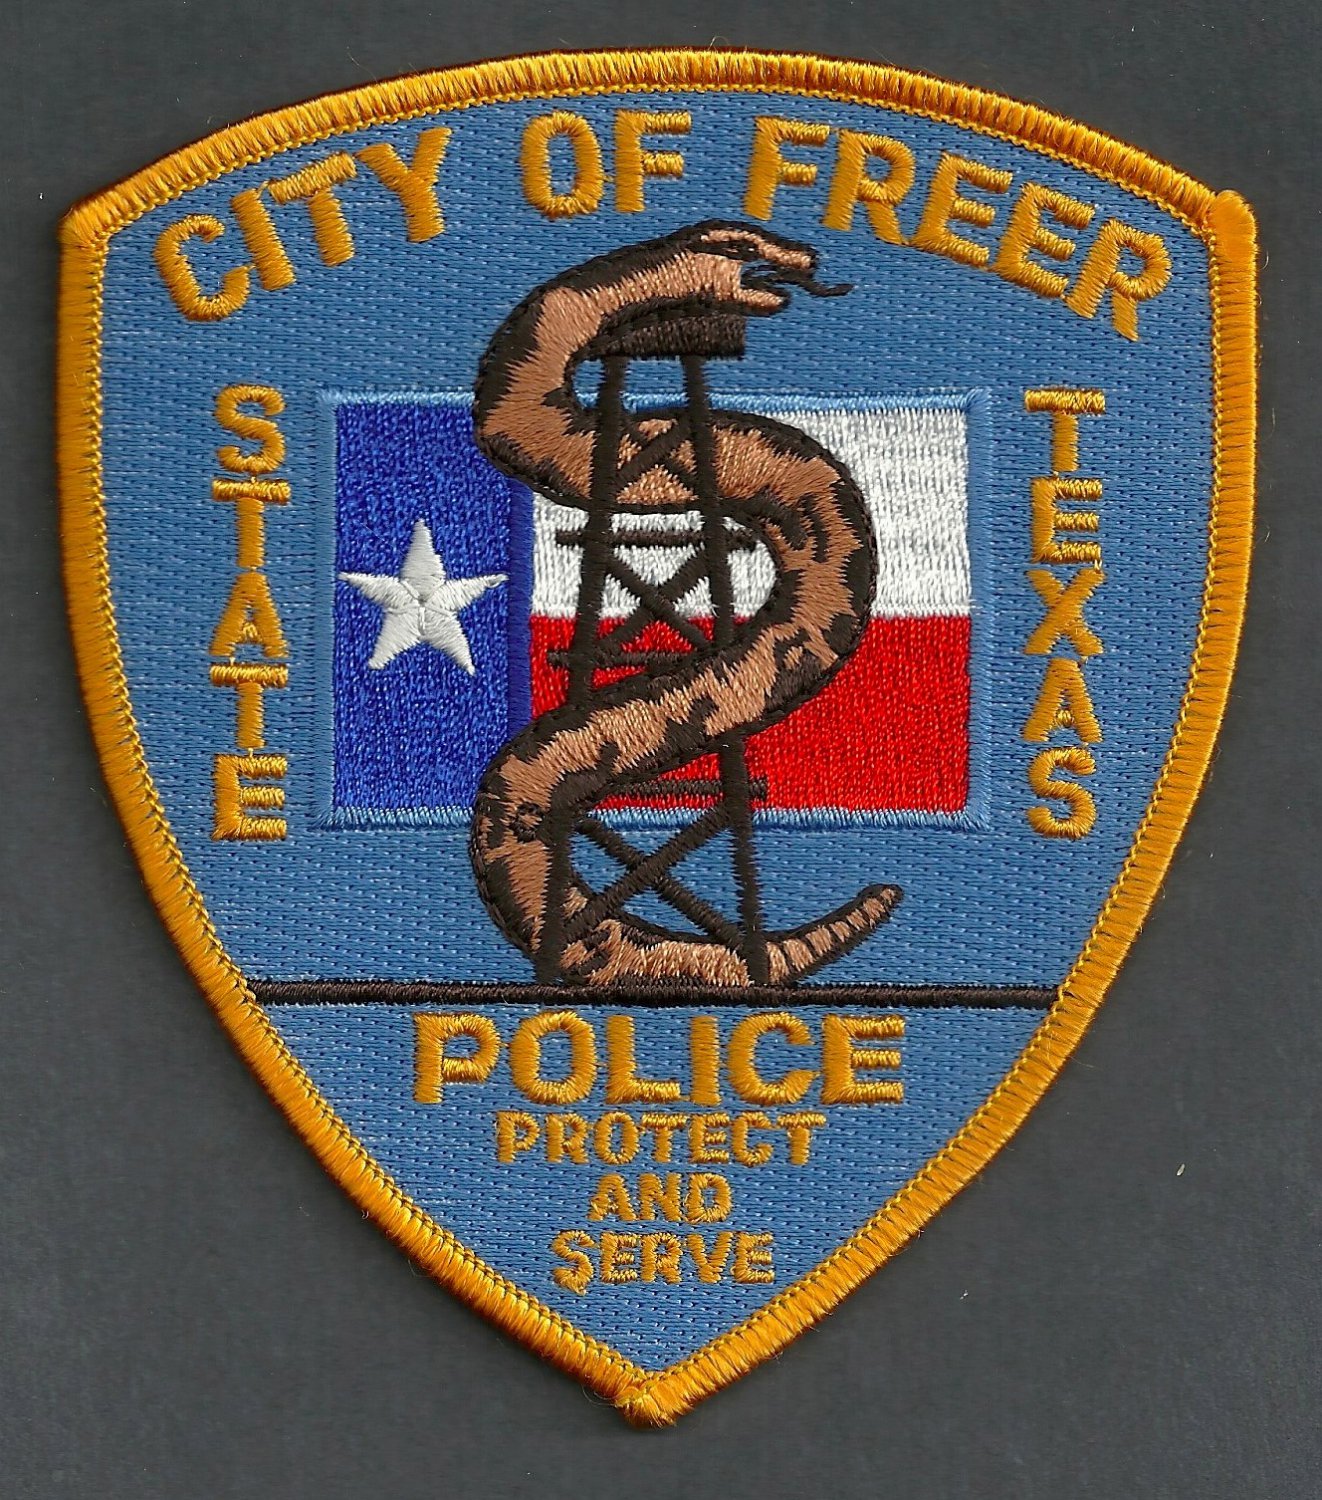 Freer Texas Police Patch Snake